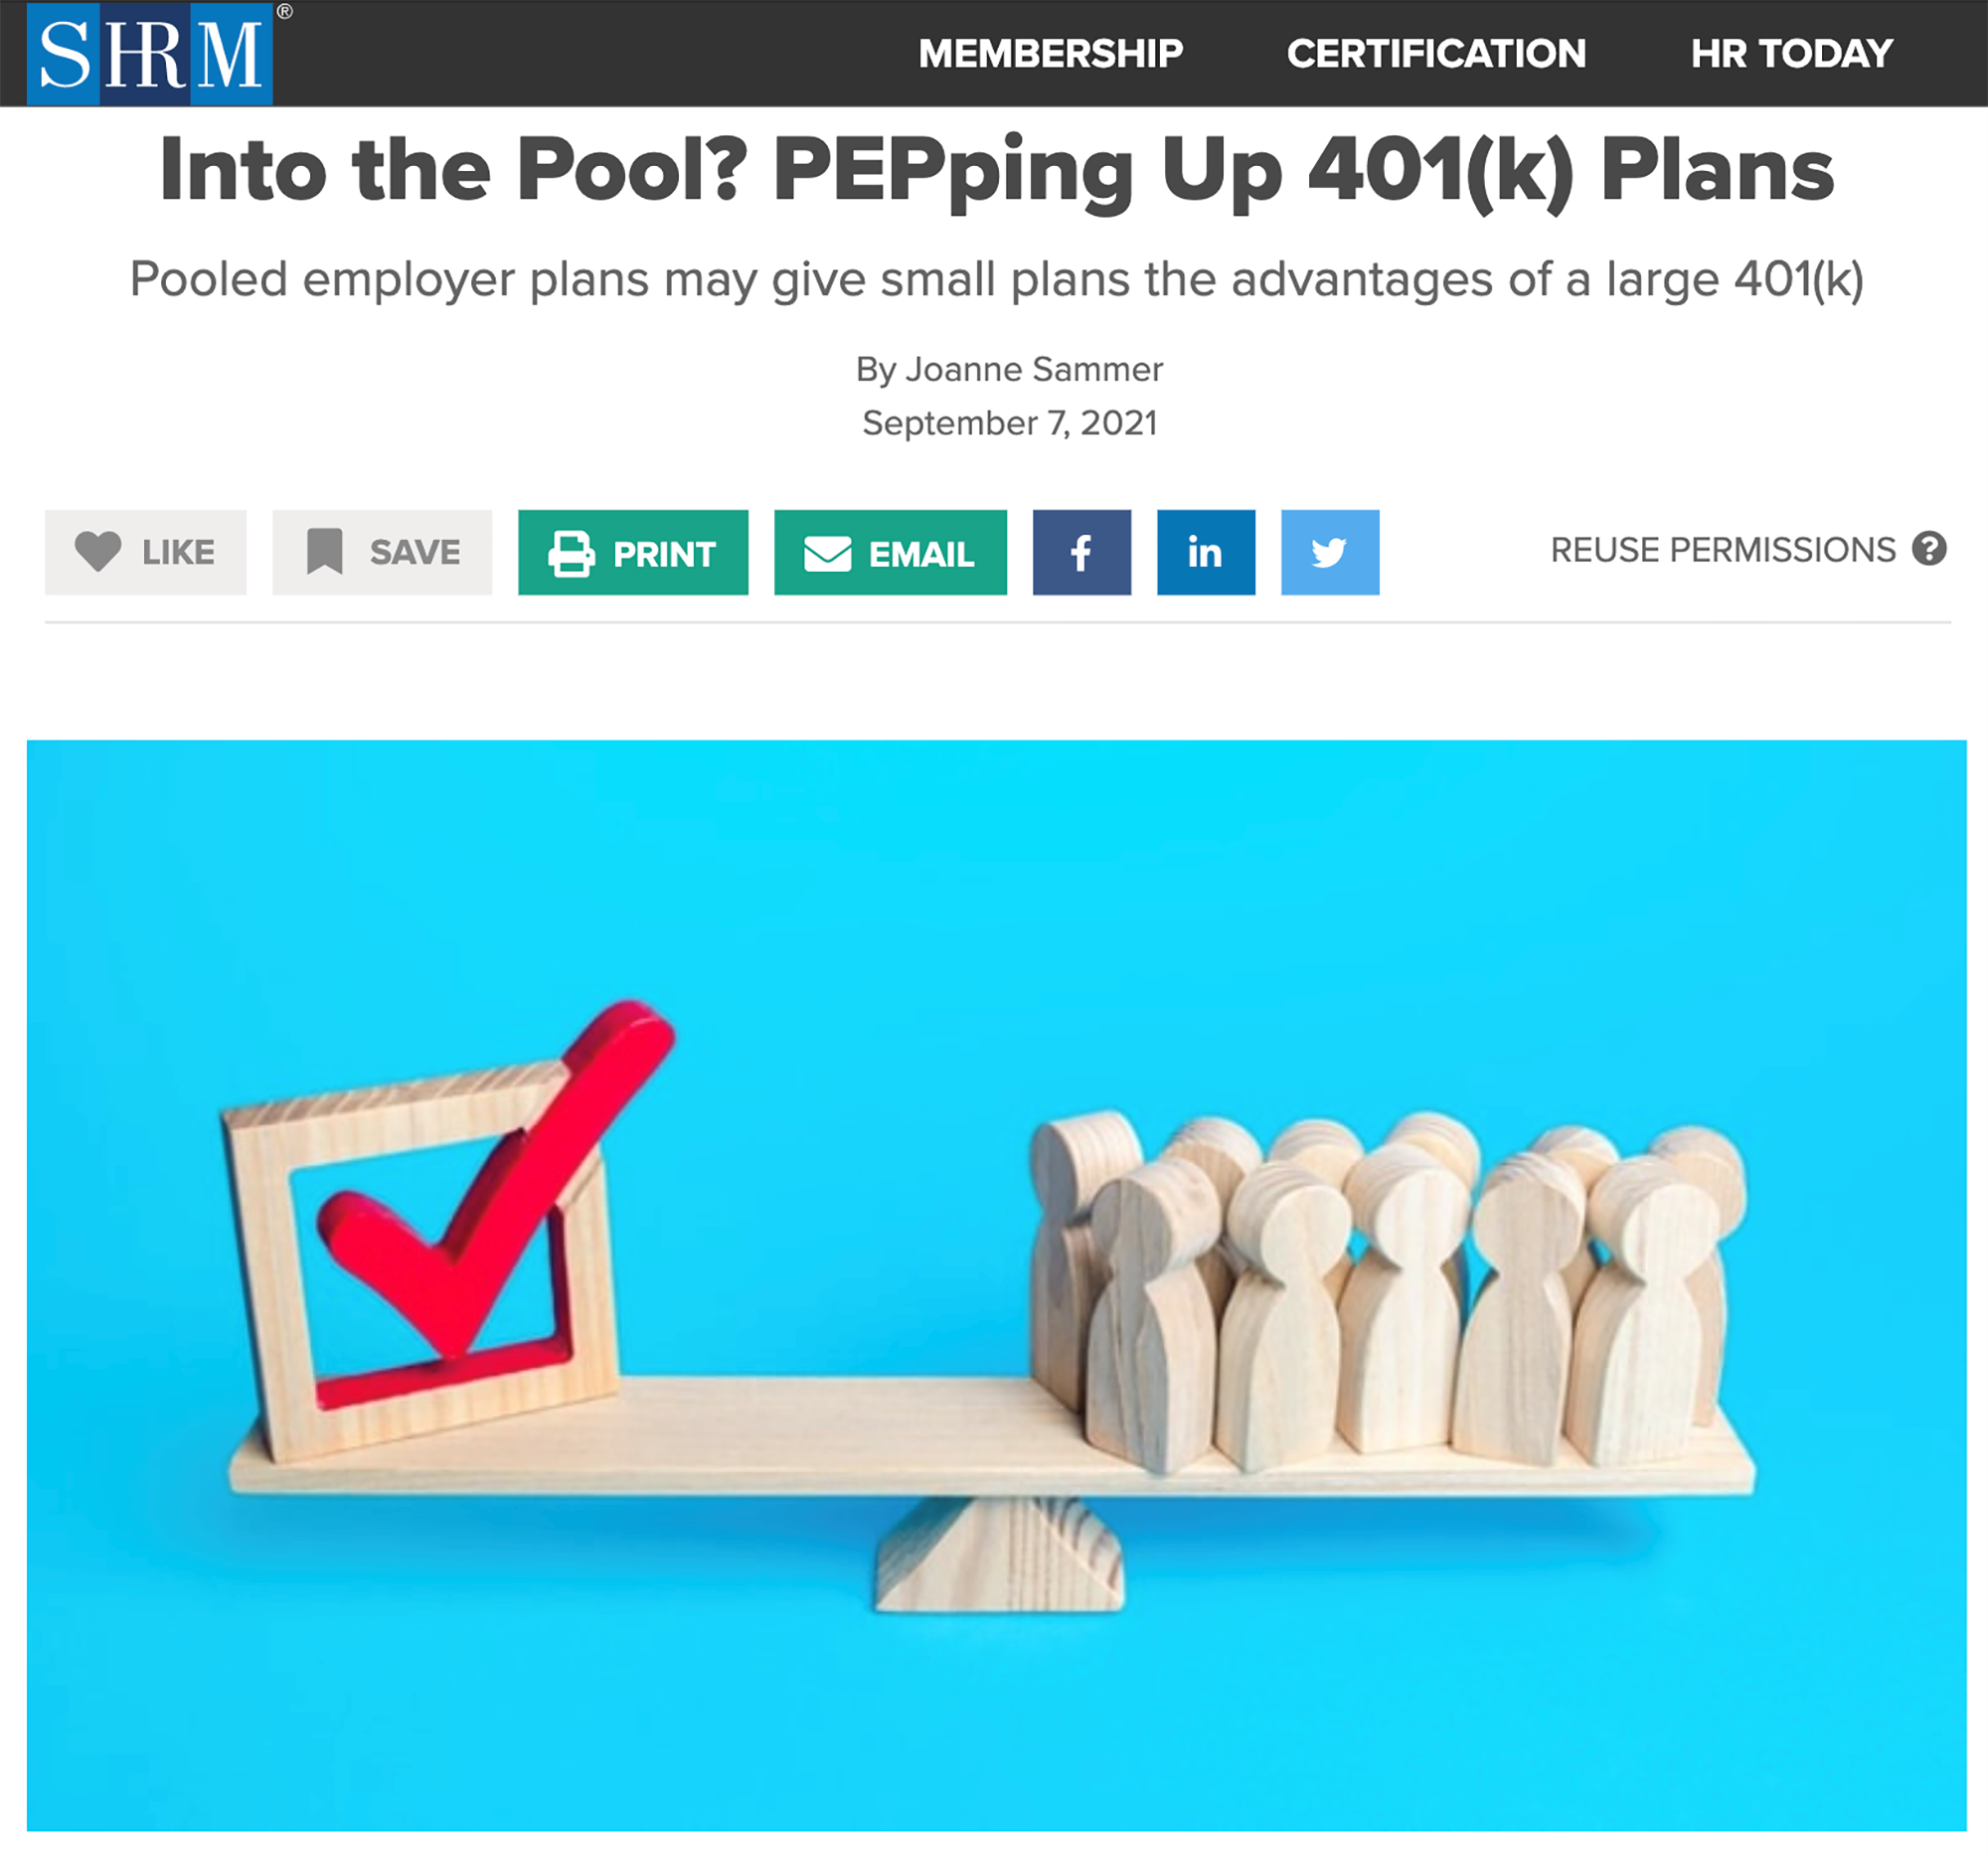 shrm-quotes-svp-joe-sellitto-in-an-article-on-pooled-employer-plans